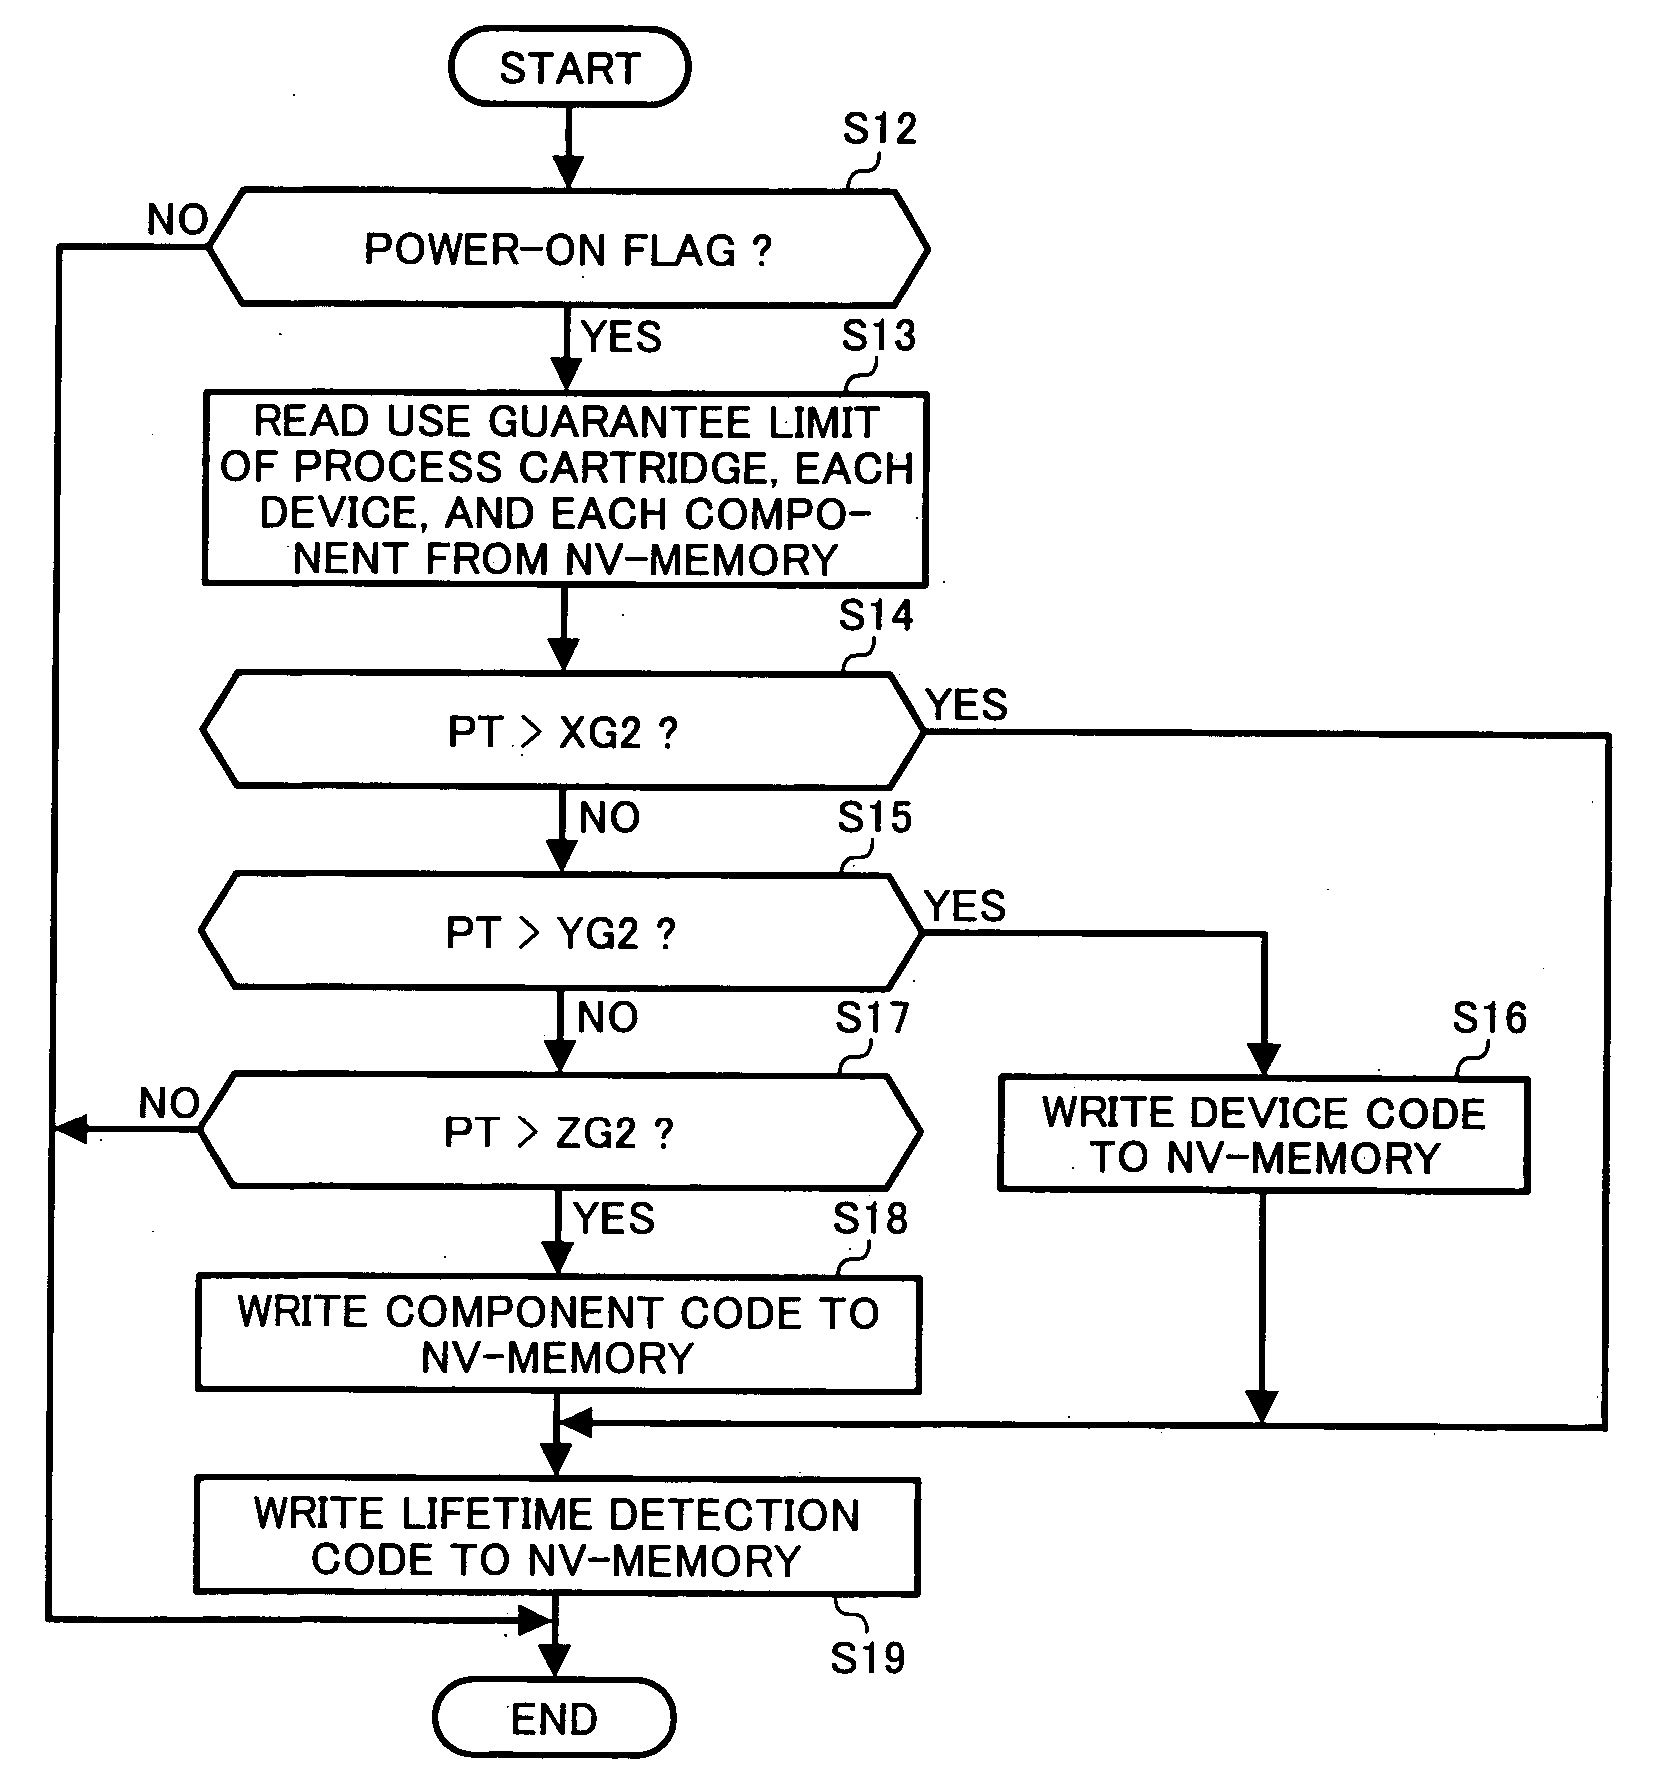 Method and apparatus for image forming capable of effectively recycling image forming unit